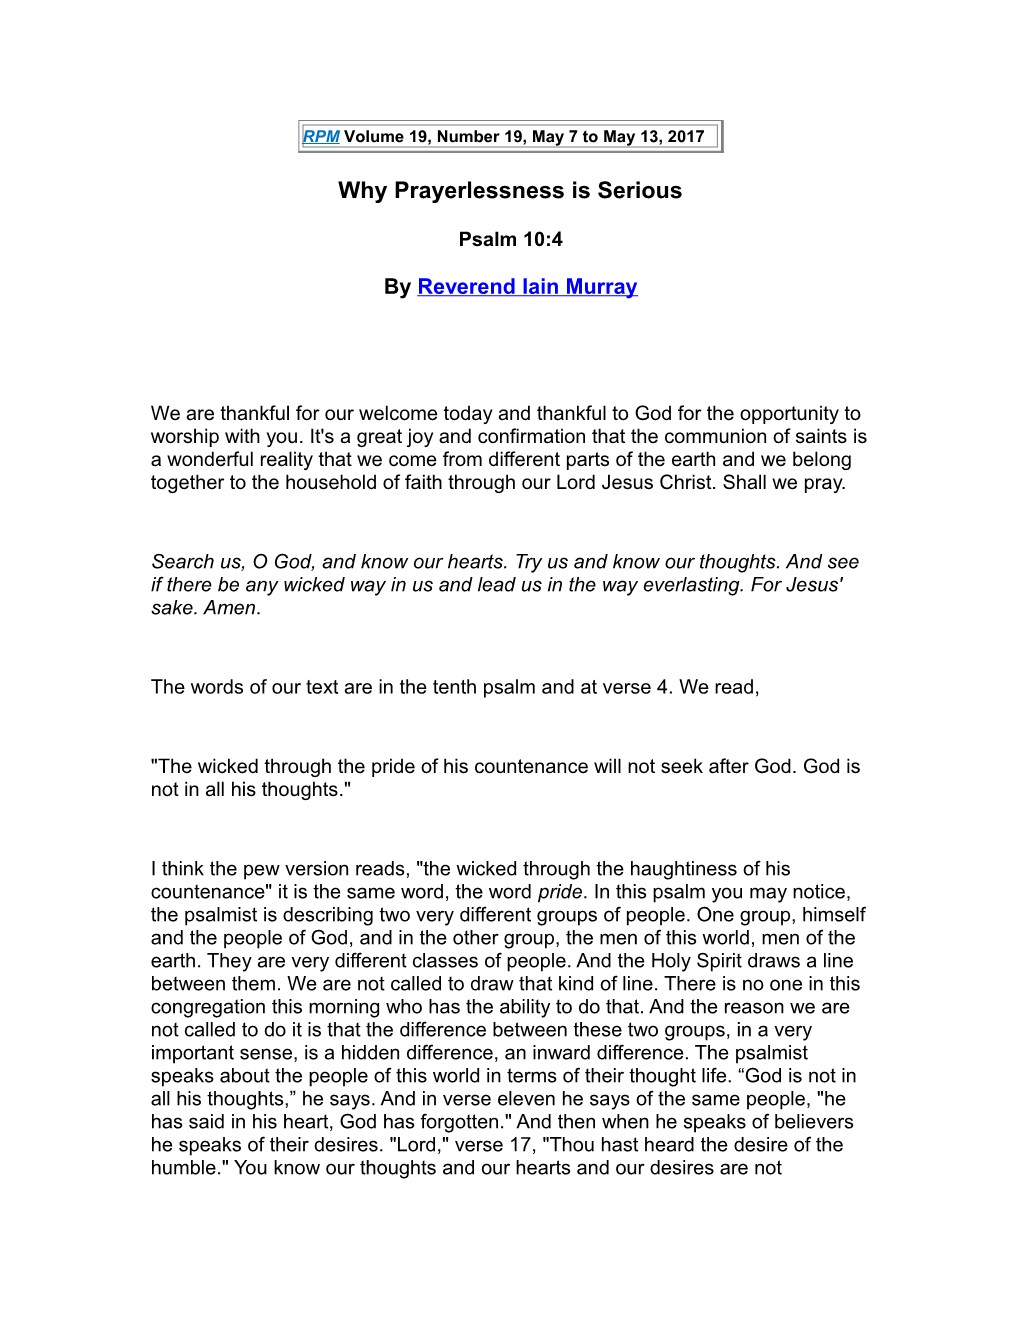 Why Prayerlessness Is Serious